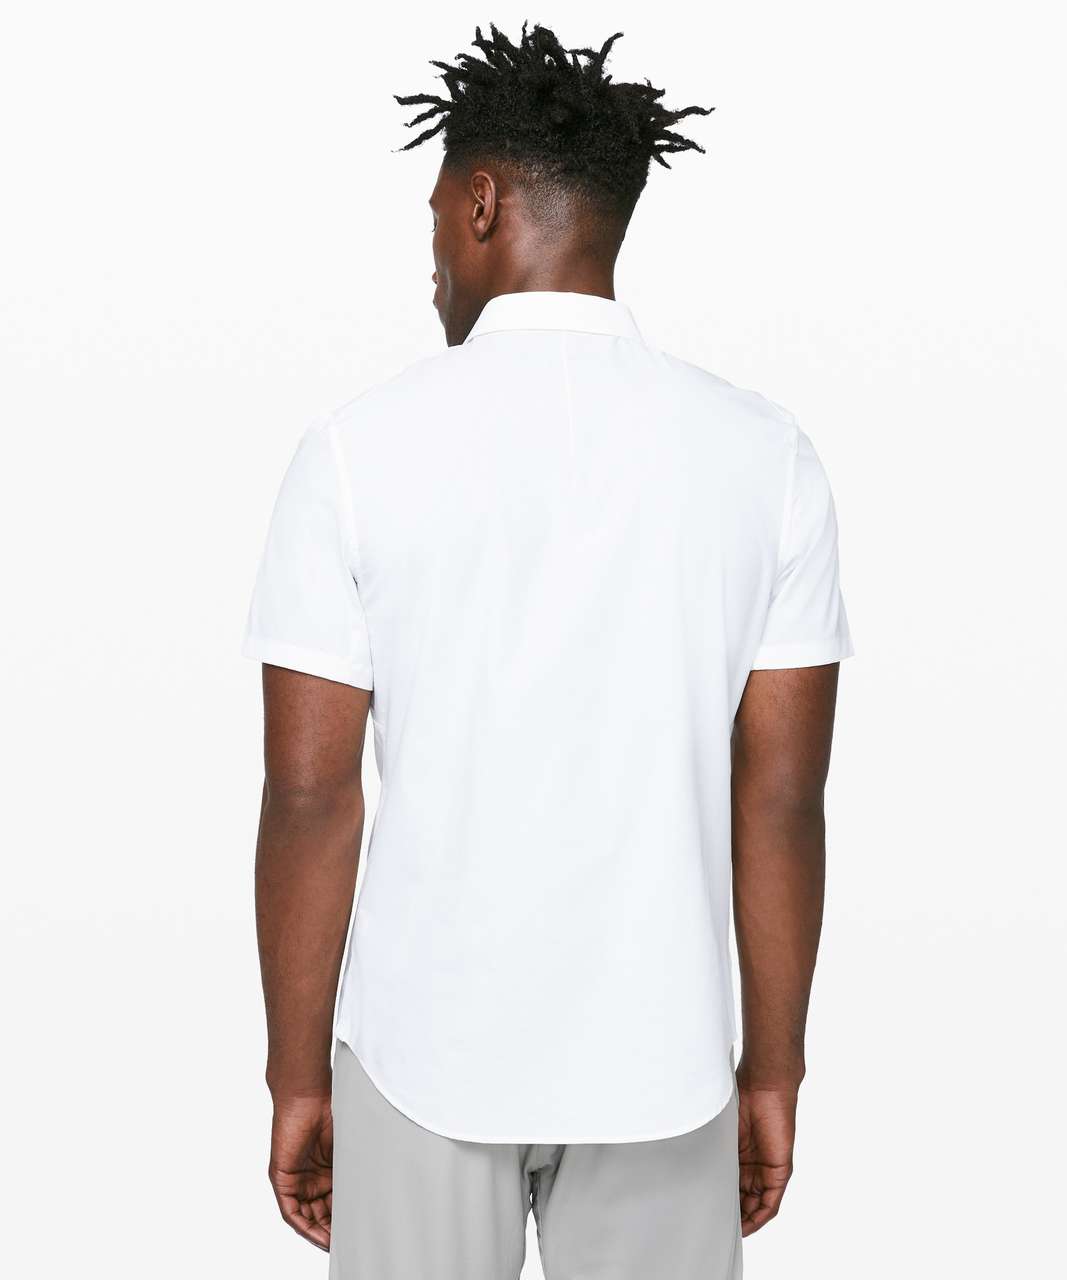 Lululemon Down to the Wire Slim Fit Short Sleeve - White